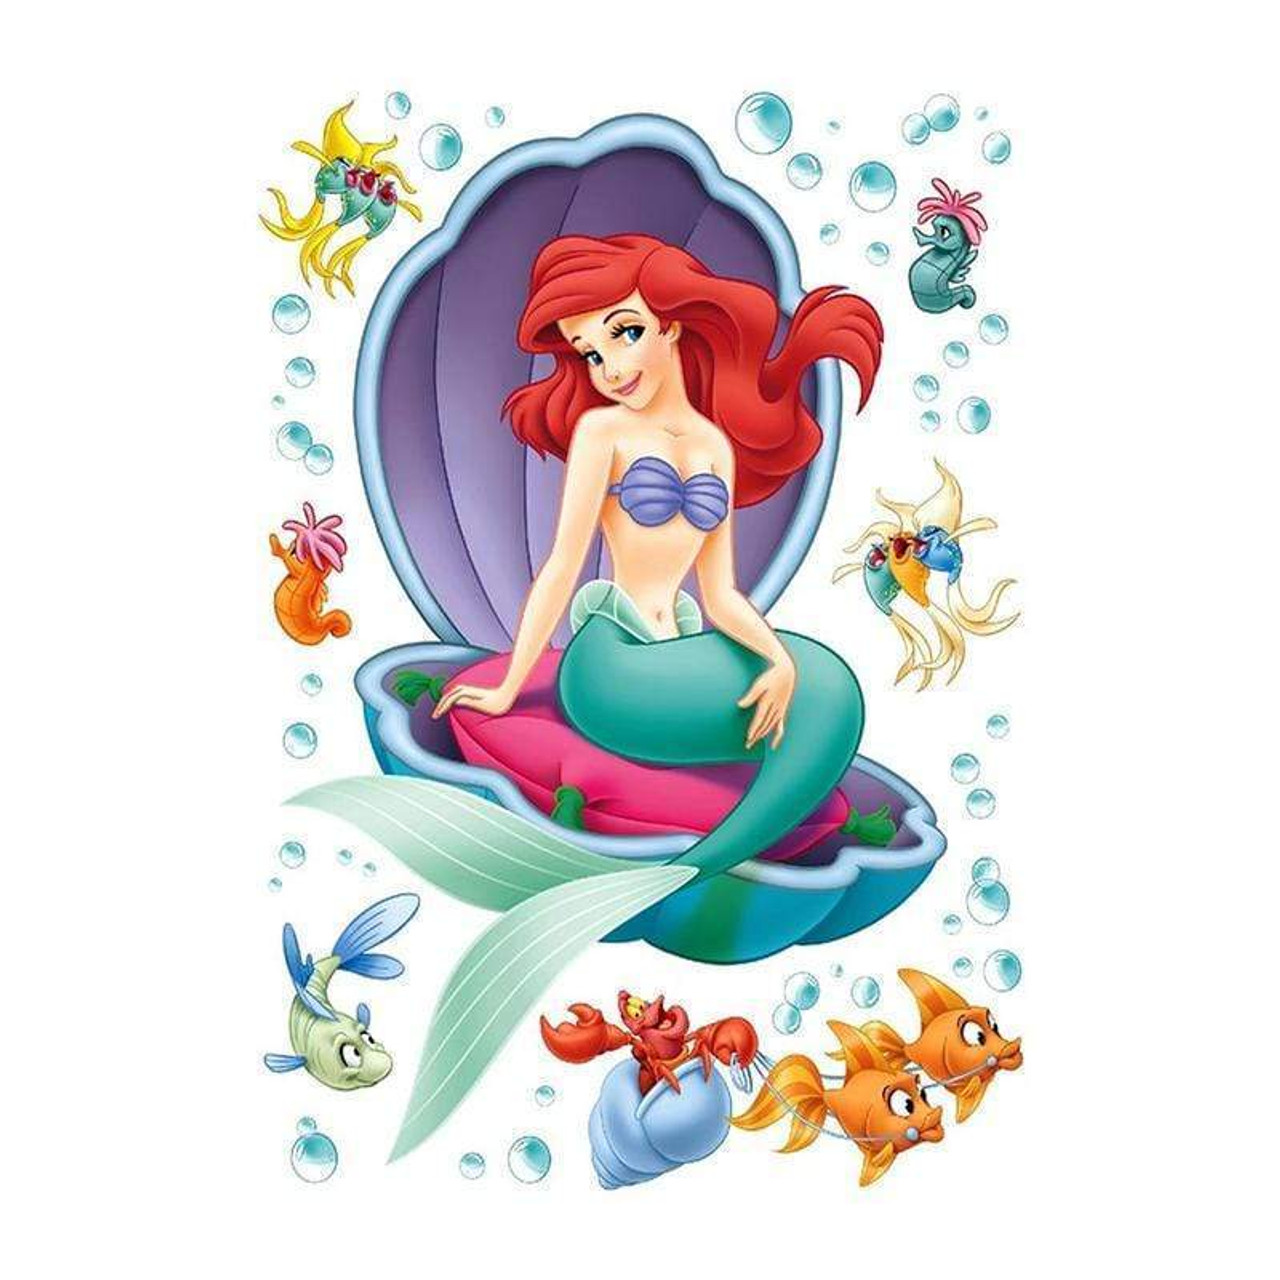 5D Diamond Painting Ariel in a Clam Shell Kit